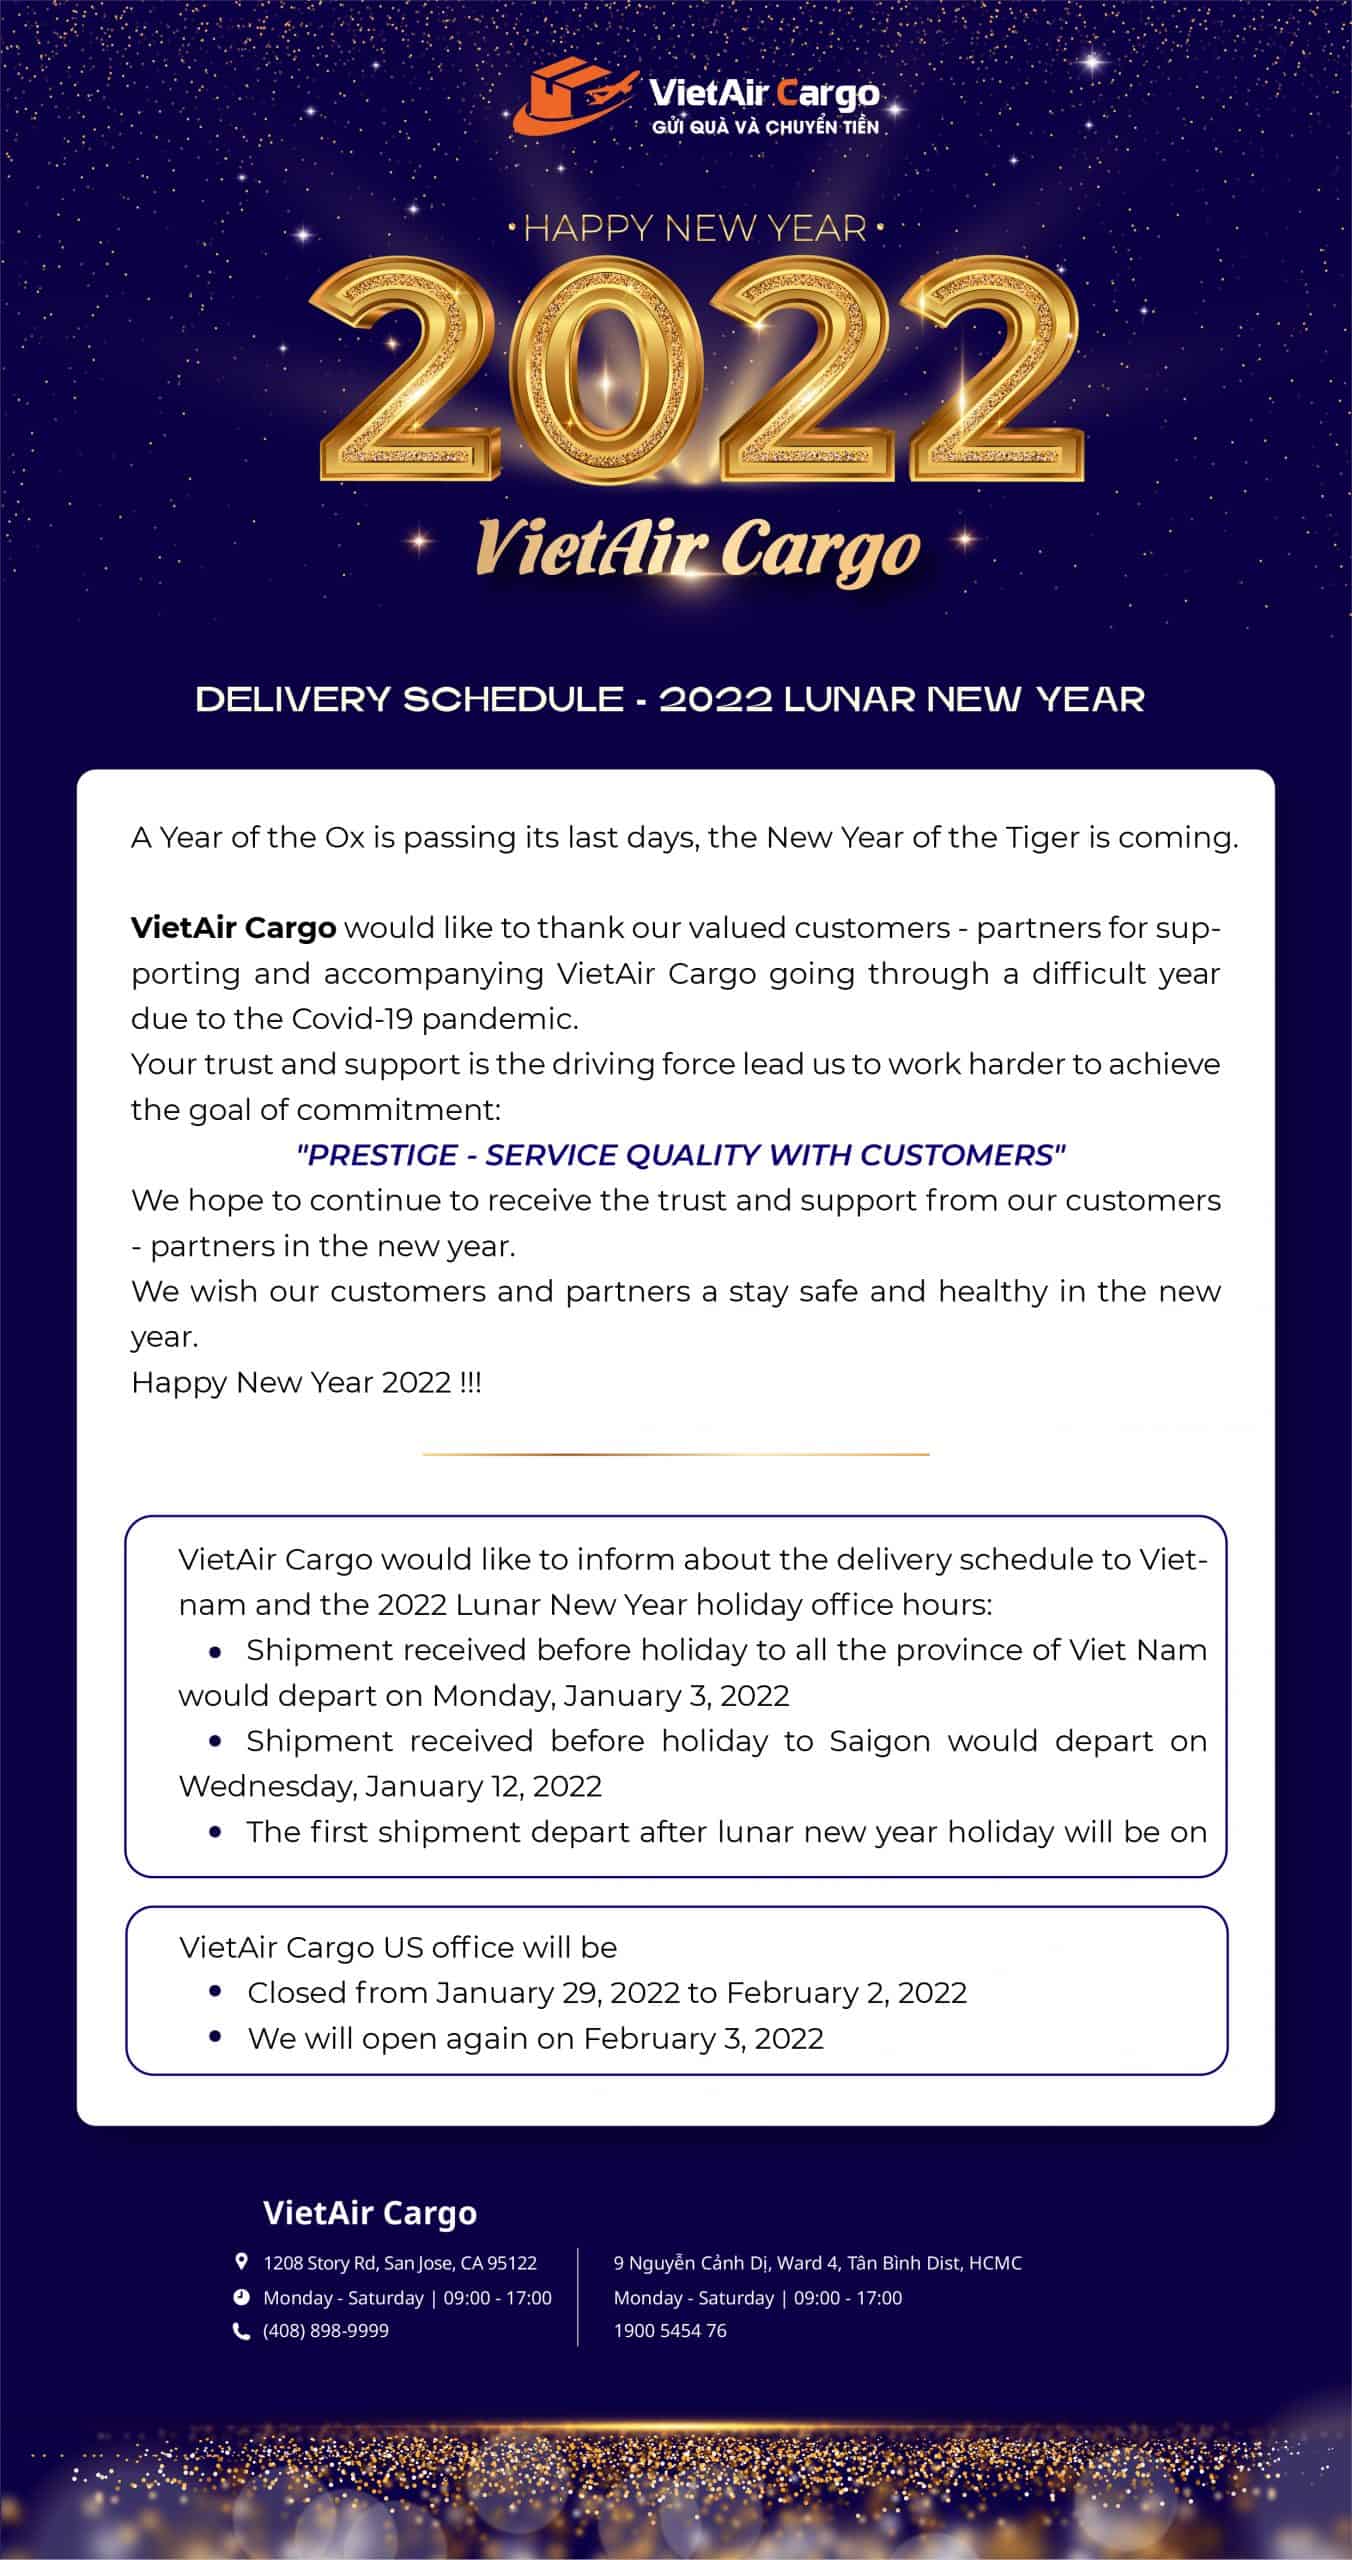 Vietaircargo-2022-02-US-v1-scaled Shipment Schedule before Lunar New Year 2022